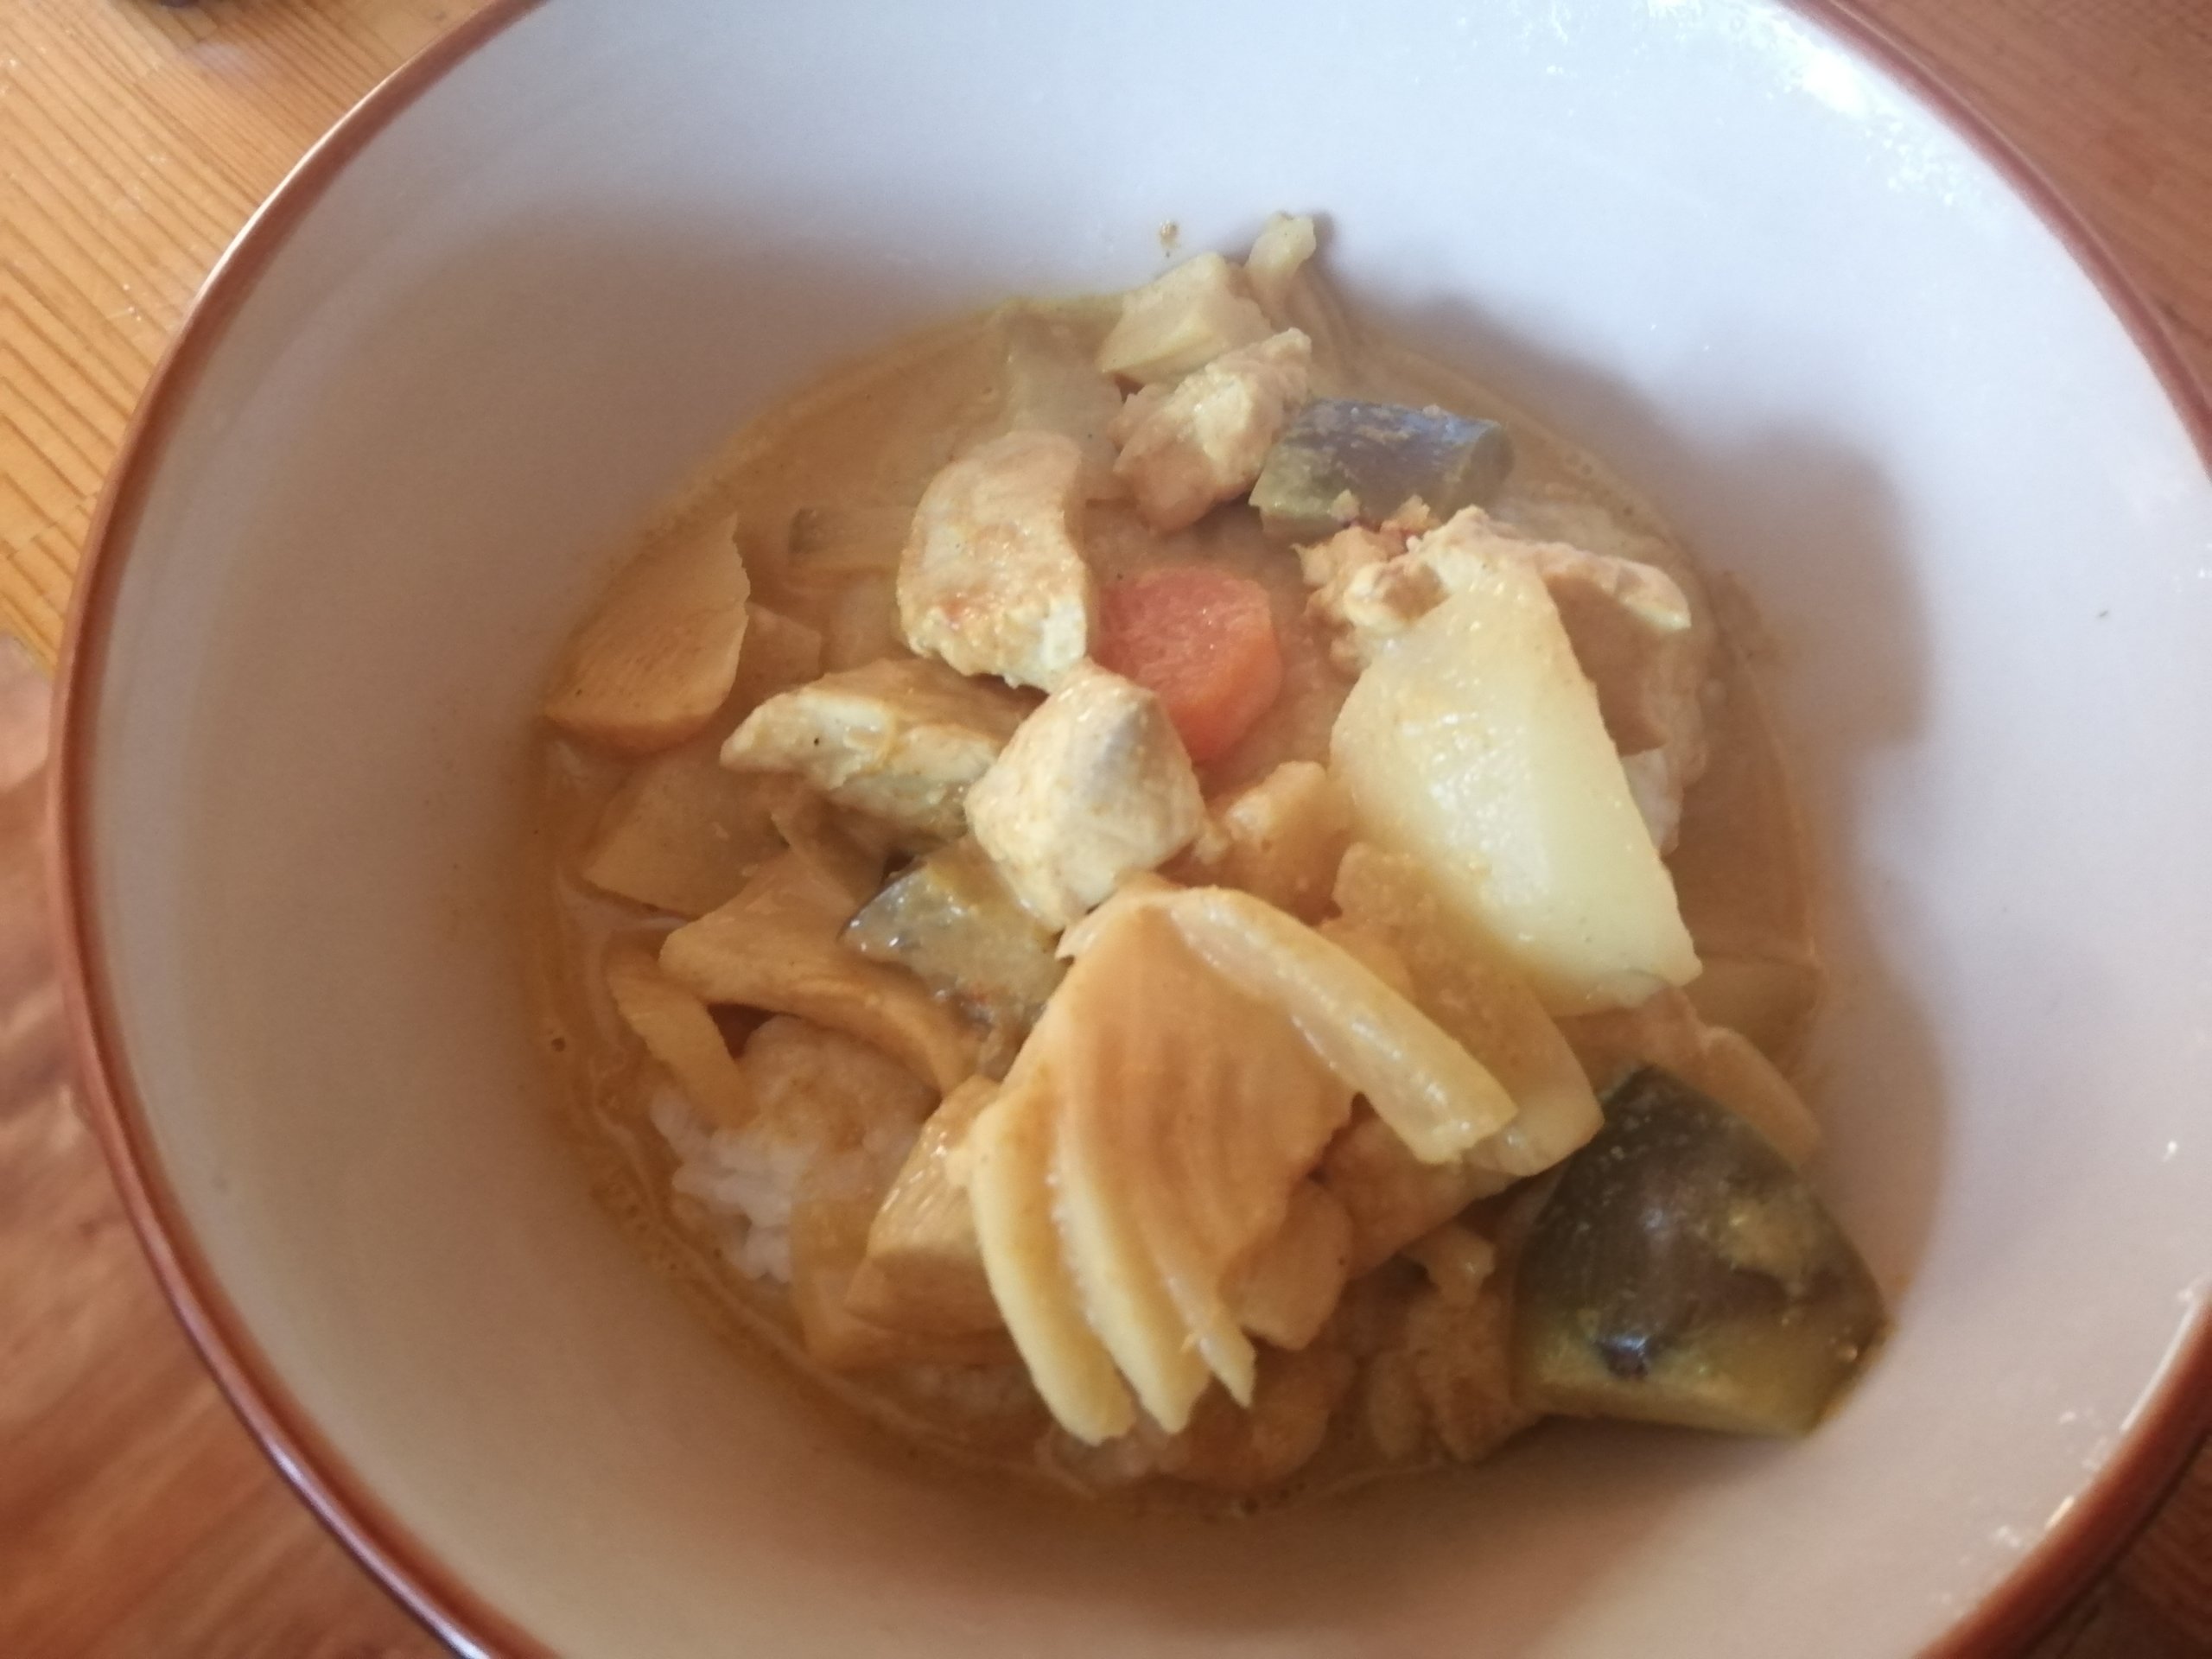 Thai curry for breakfast.